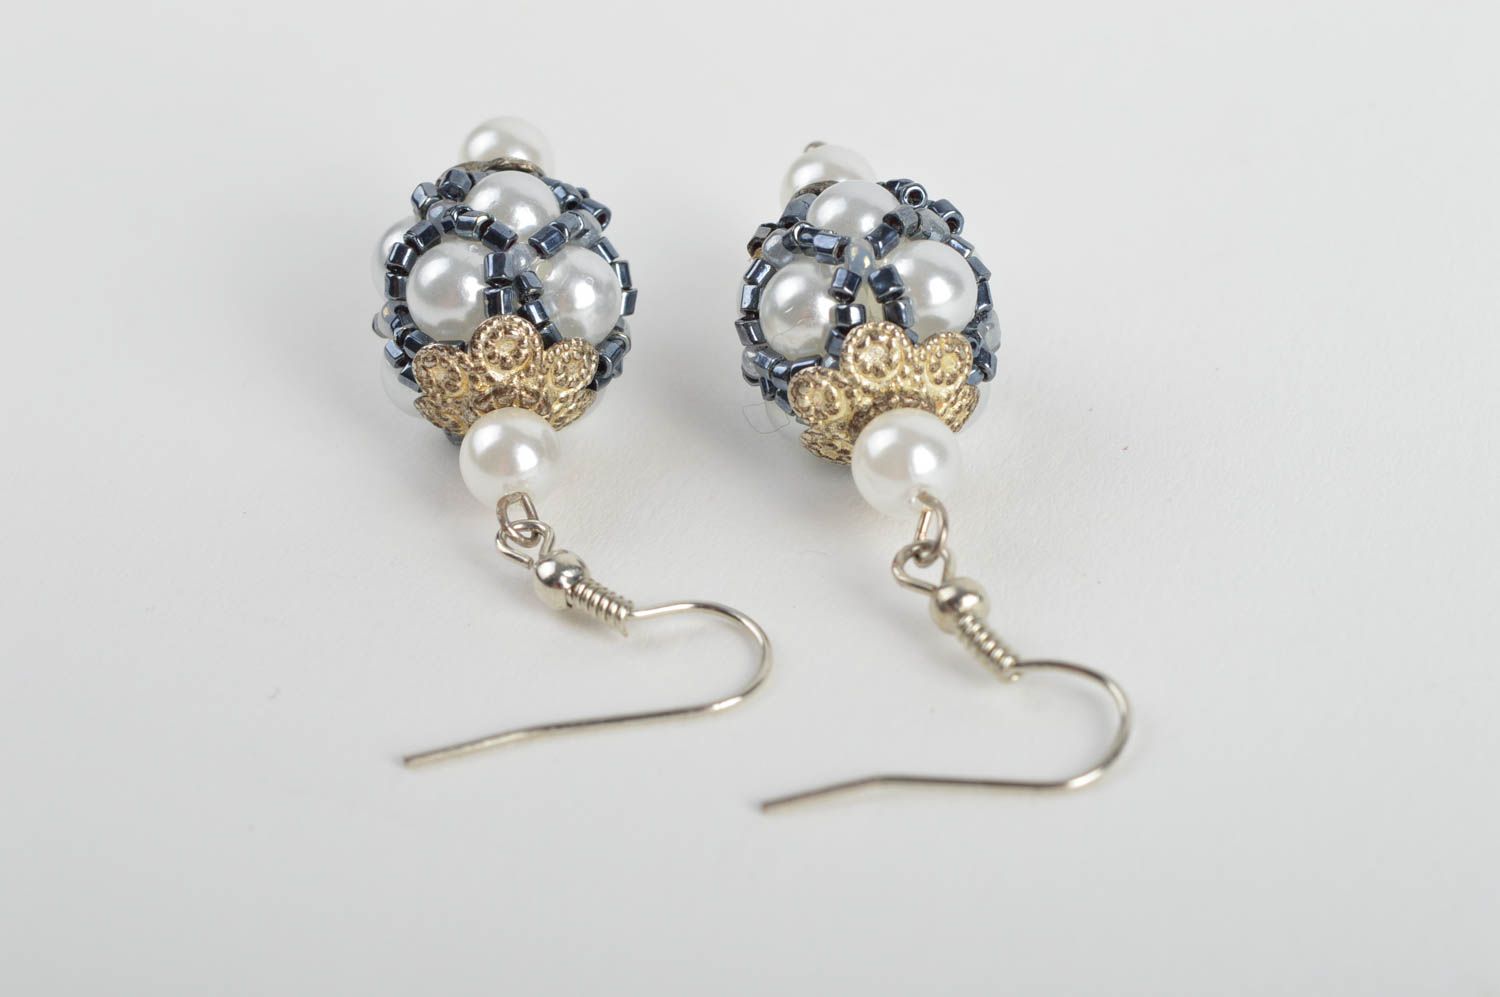 Handmade designer dangle earrings with faux pearls and blue beads photo 5